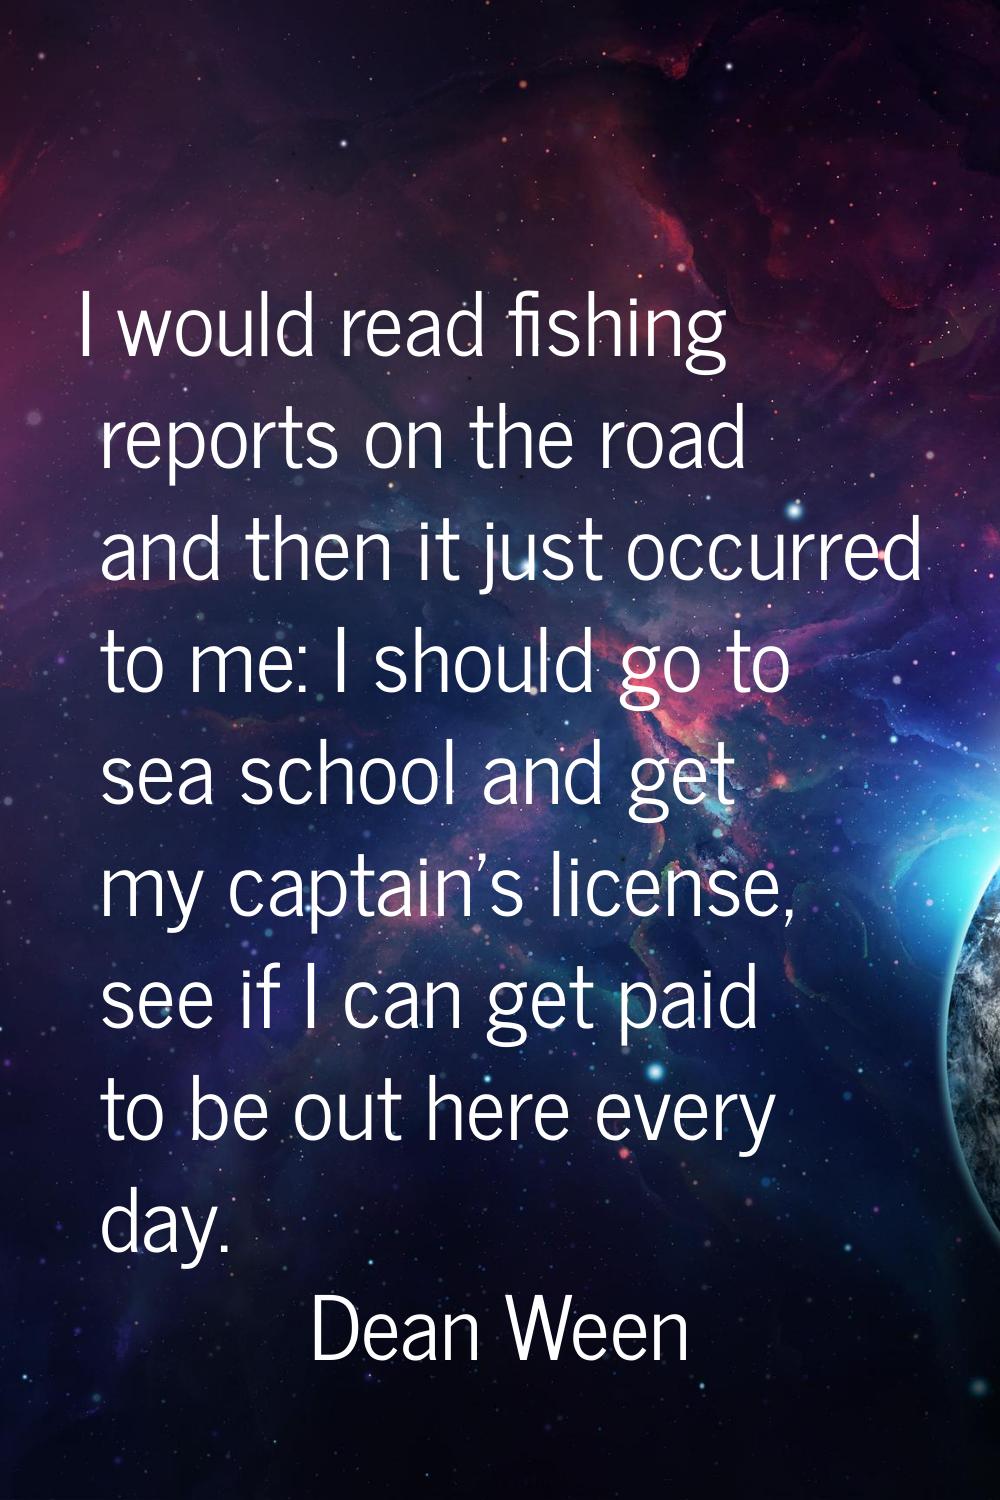 I would read fishing reports on the road and then it just occurred to me: I should go to sea school